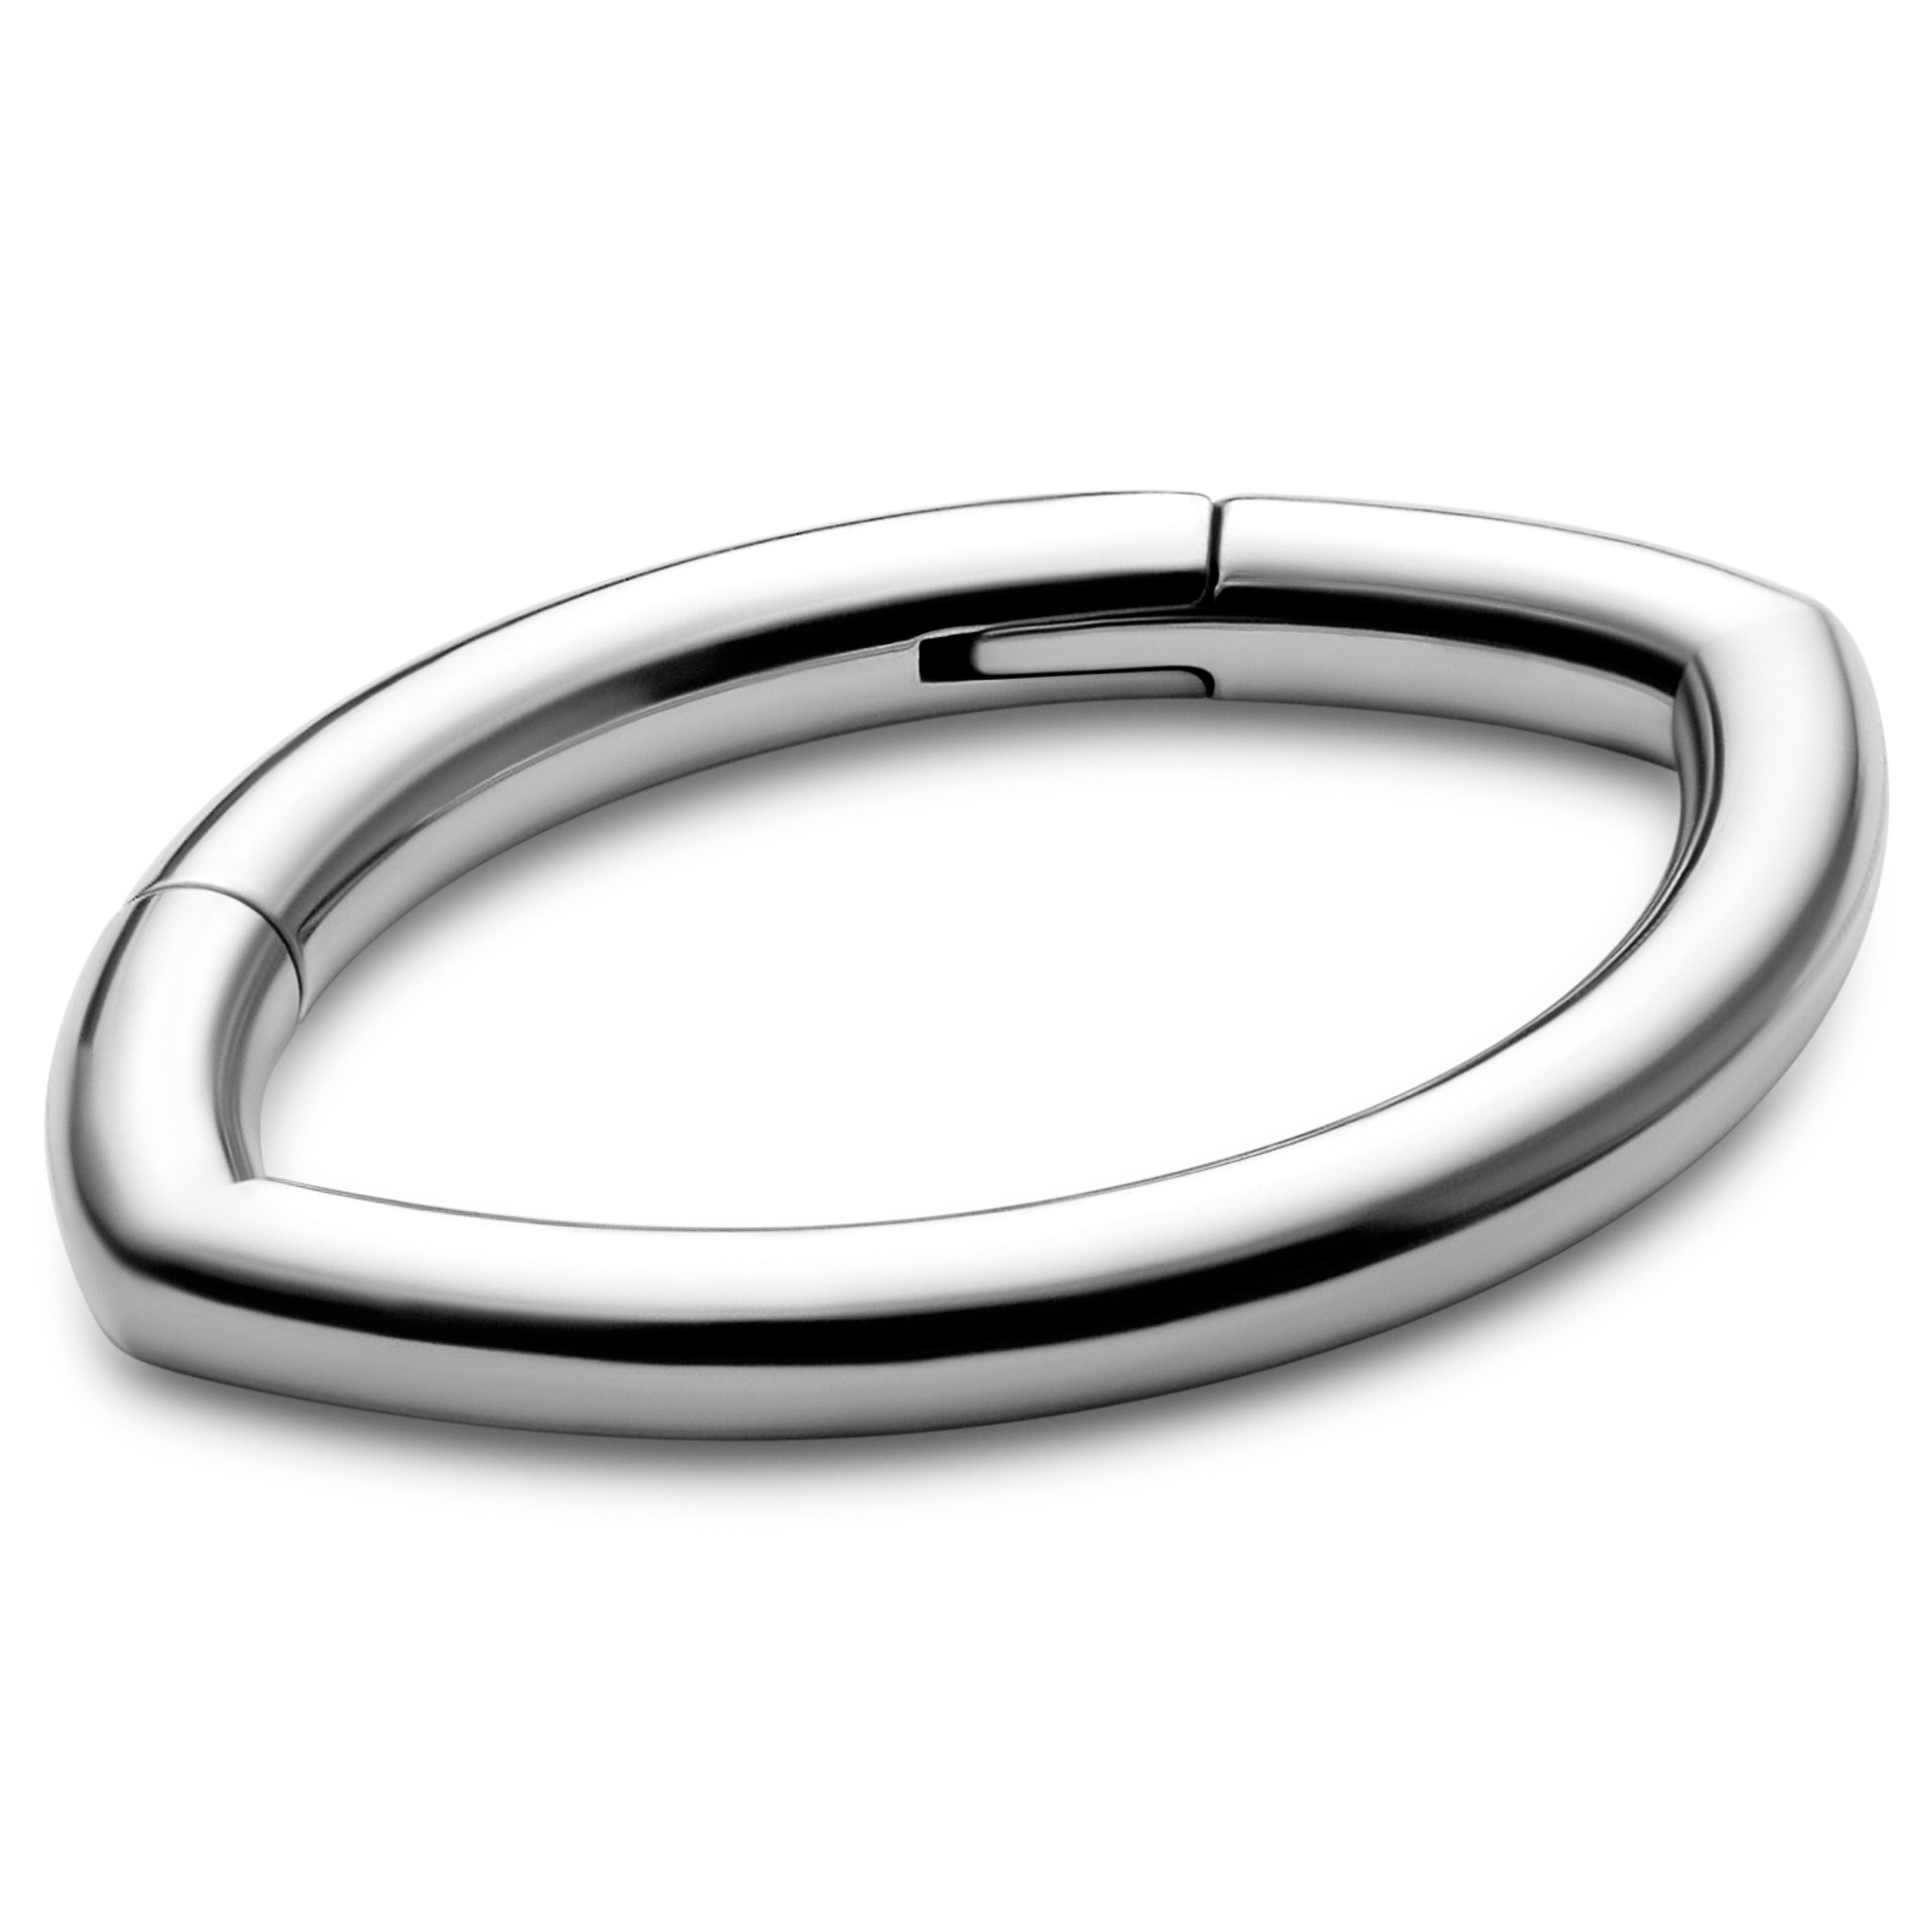 10 mm Silver-Tone Surgical Steel Oval Piercing Ring